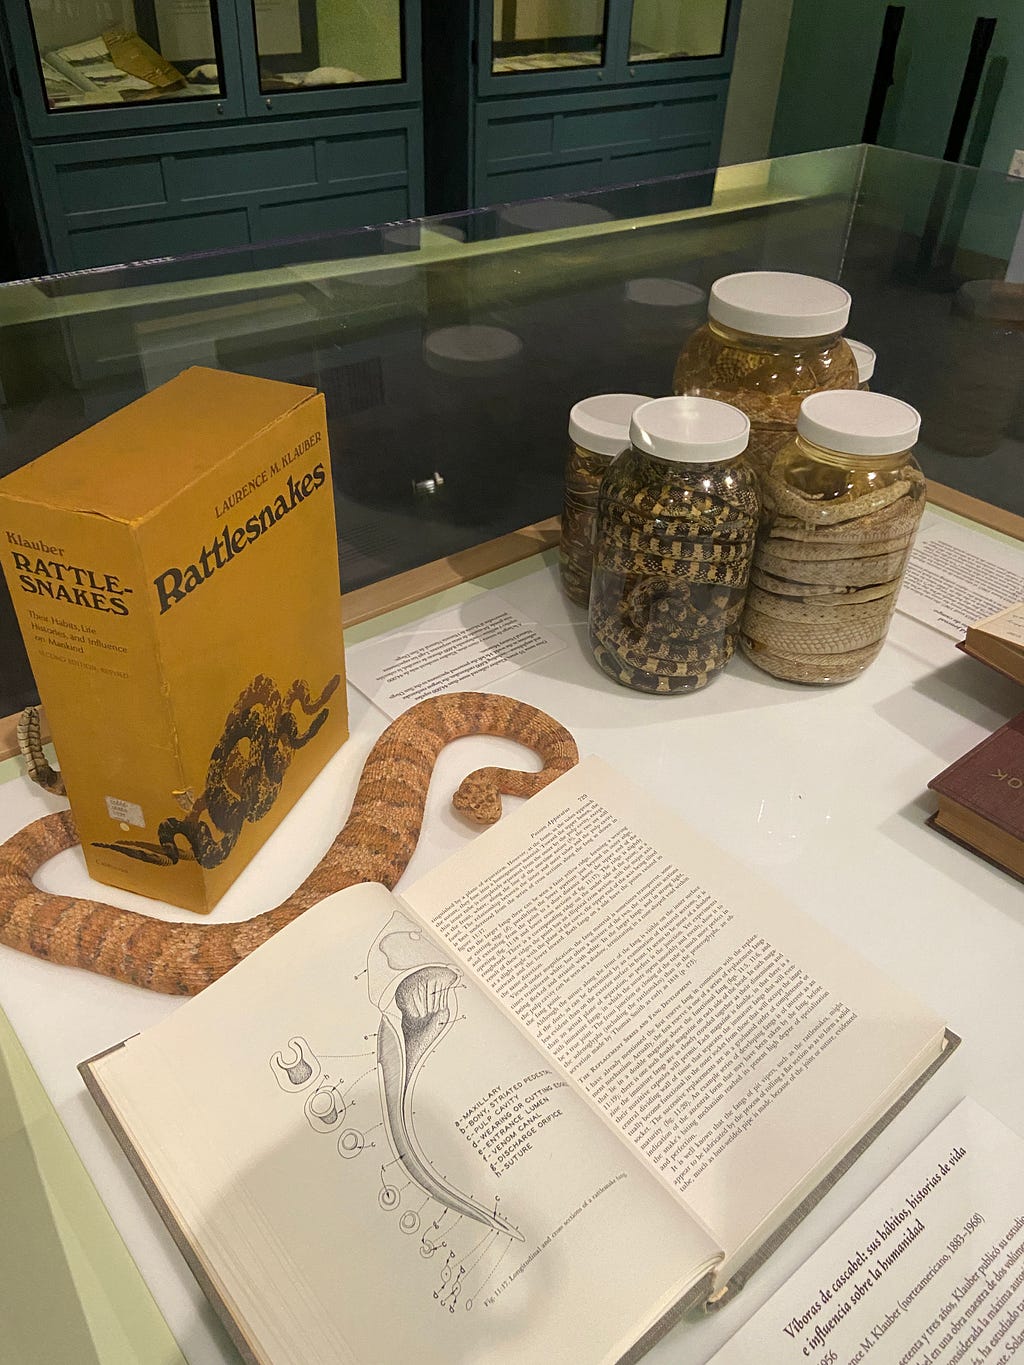 Klauber was 73 years old when he published his masterwork Rattlesnakes: Their Habits, Life Histories, and Influence on Mankind. The two volumes had 1,533 pages with an index 75 pages long. (KimberlyUs)